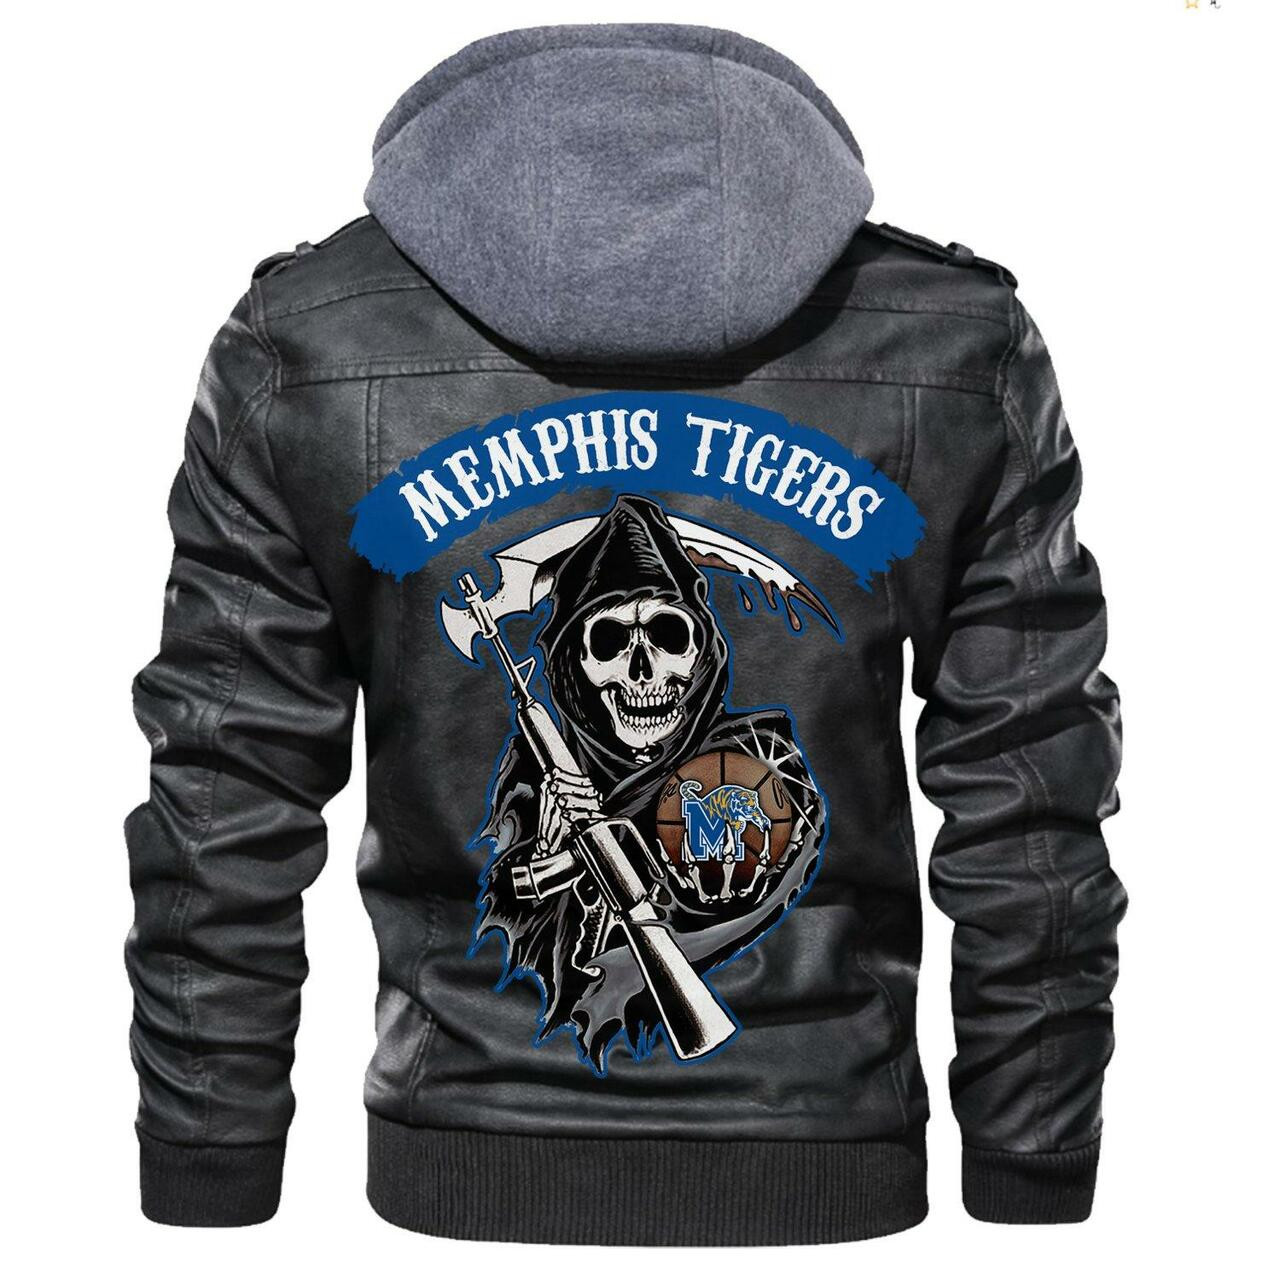 Check out and find the right leather jacket below 83